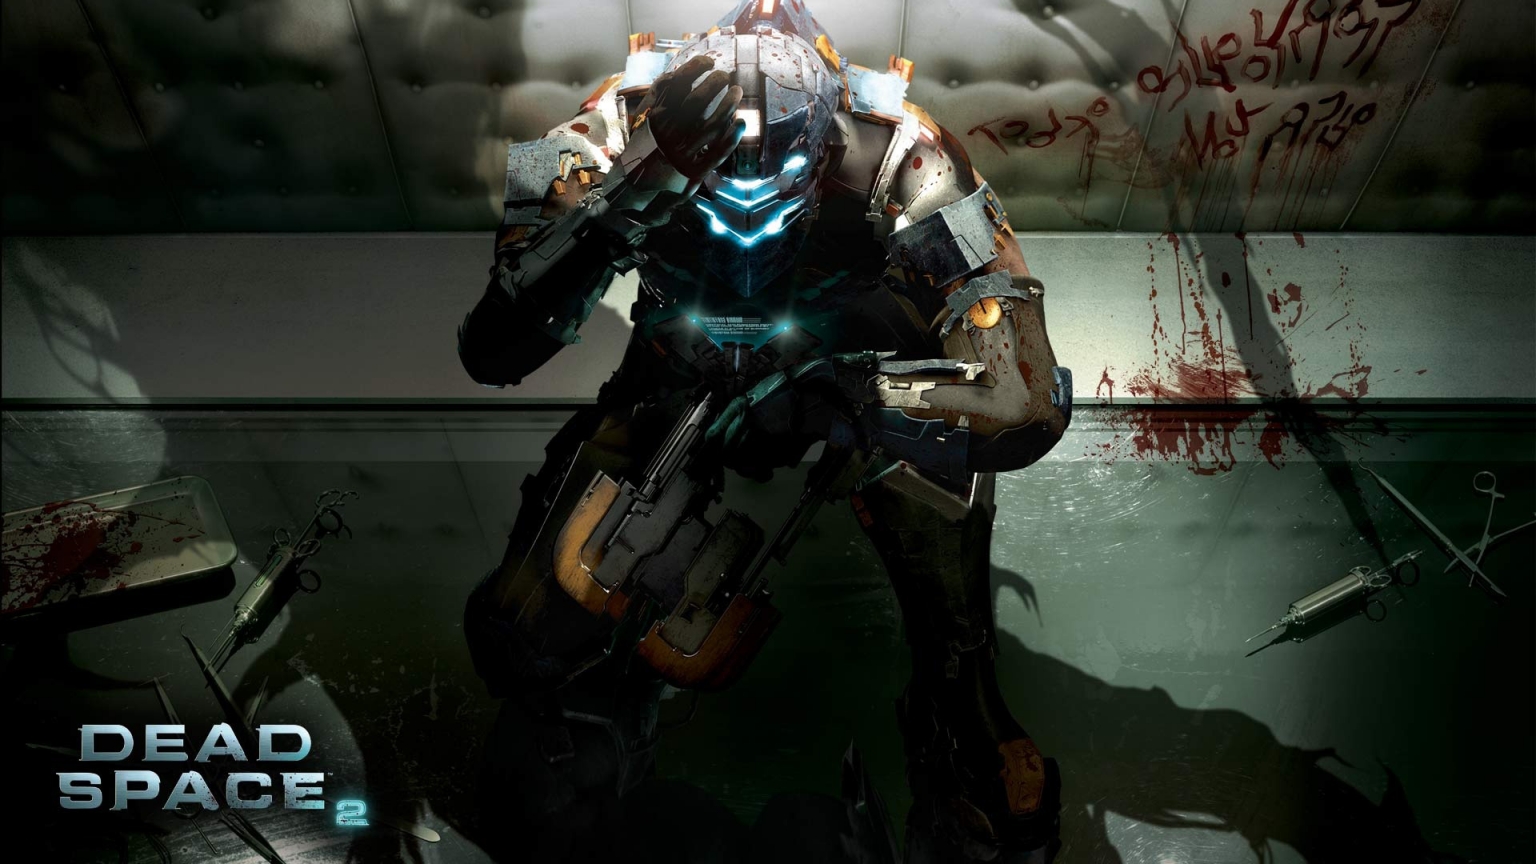 Dead Space 2 Character for 1536 x 864 HDTV resolution